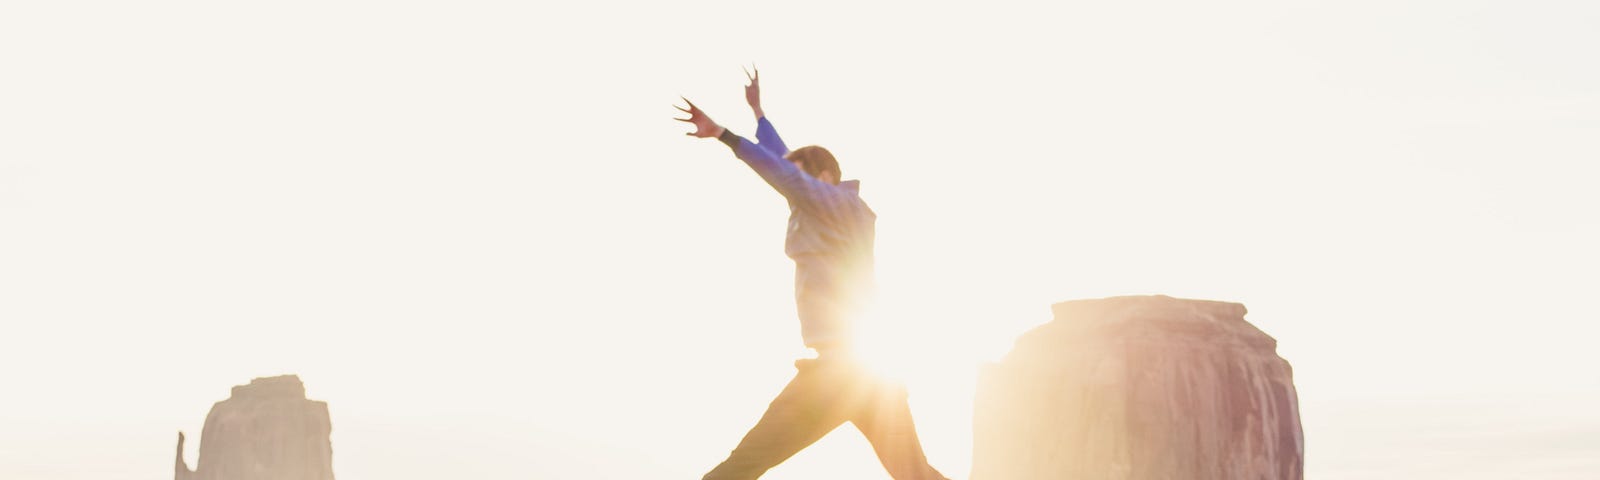 Man jumping over red rocks with sun shining